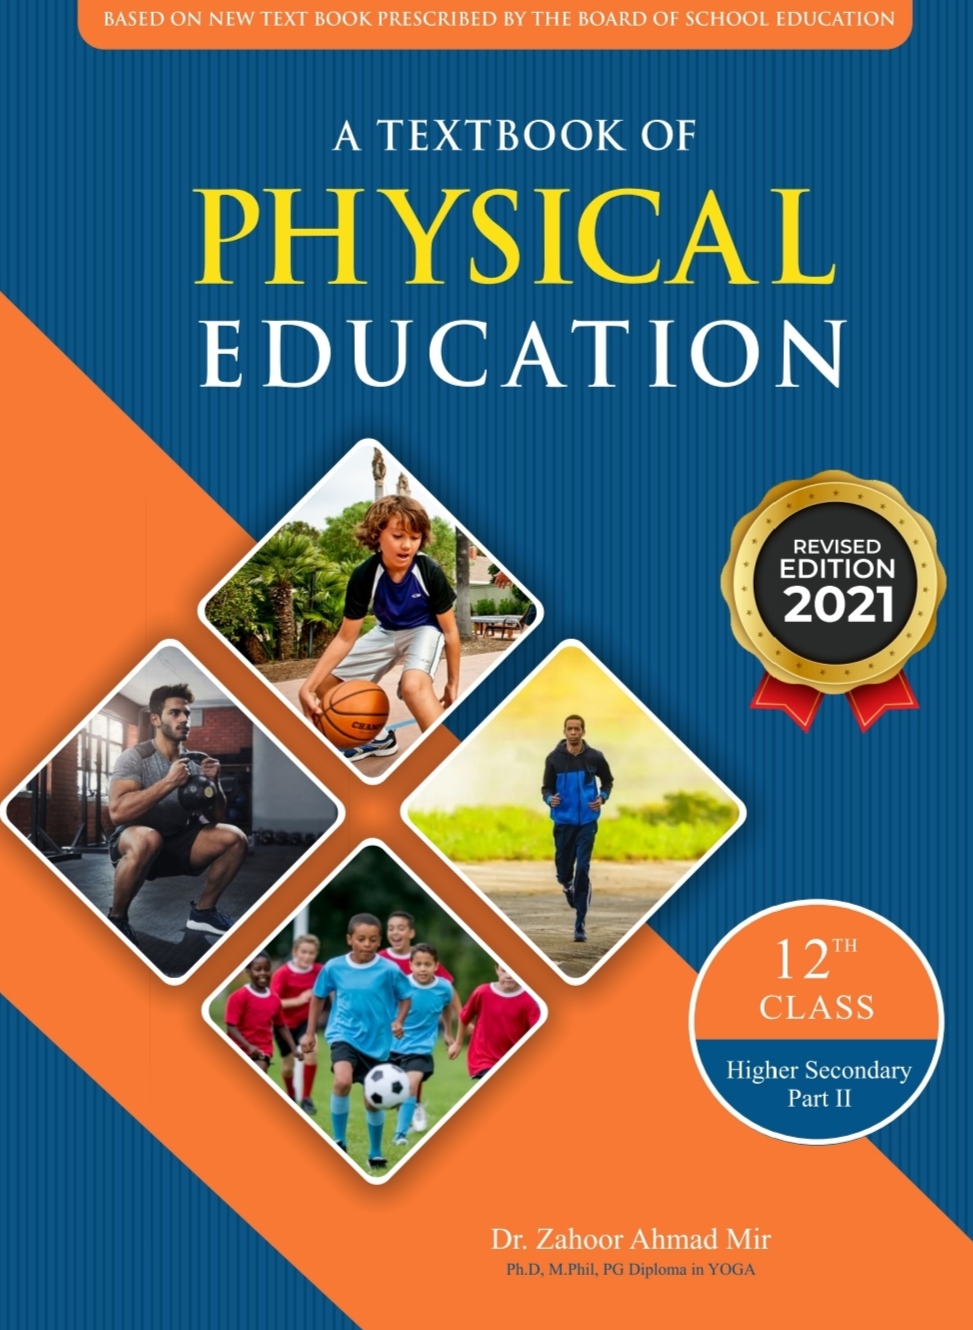 big think physical education book